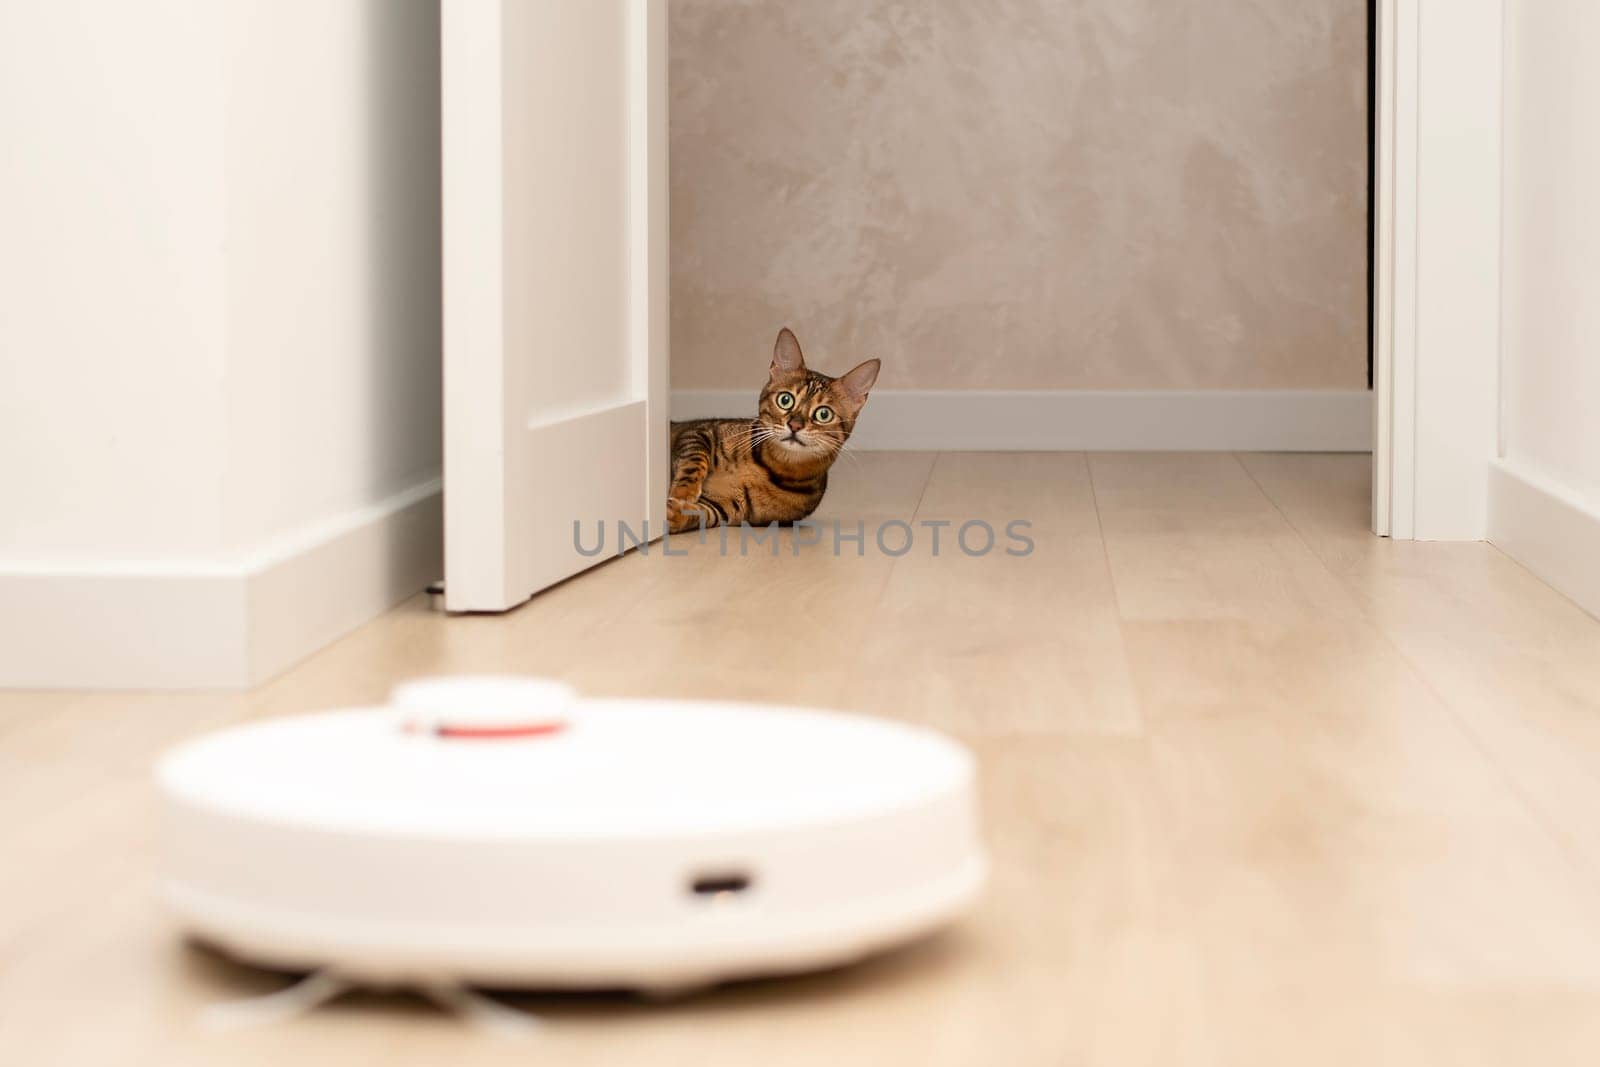 Pets concept. A beautiful, striped, playful, leopard cat, Bengal breed, lies funny, looks out from behind the door and watches a white robot vacuum cleaner cleaning in a home interior.